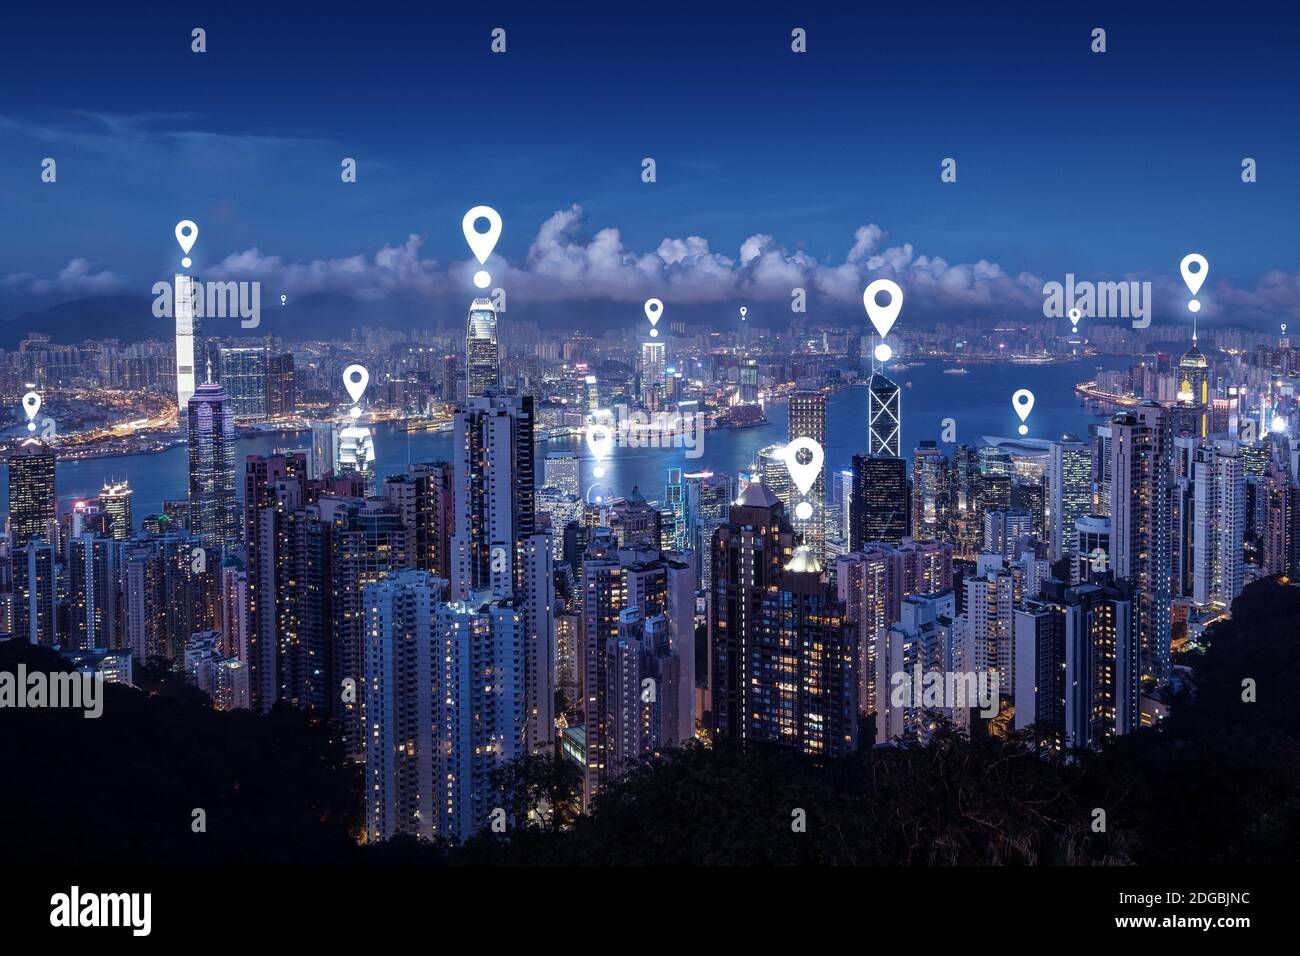 Map pin icons on cityscape of Hong Kong at dusk. Scenic view of Hong Kong's famous skyline from the Victoria Peak at night. Blue tone. Stock Photo